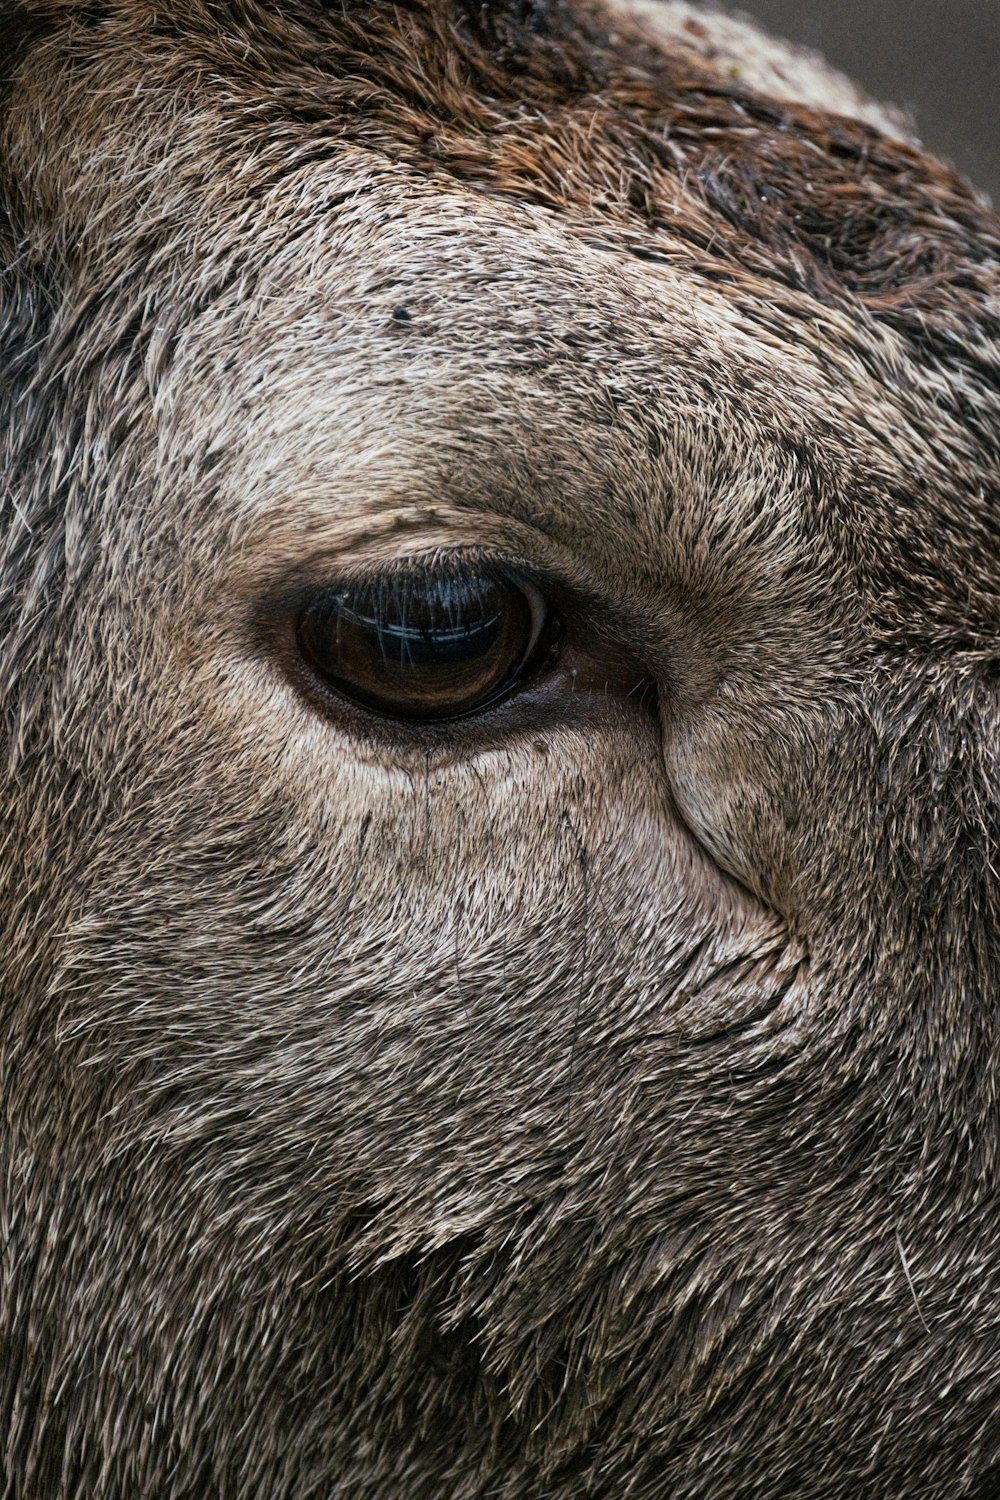 a close up of a cow's eye with a blurry background